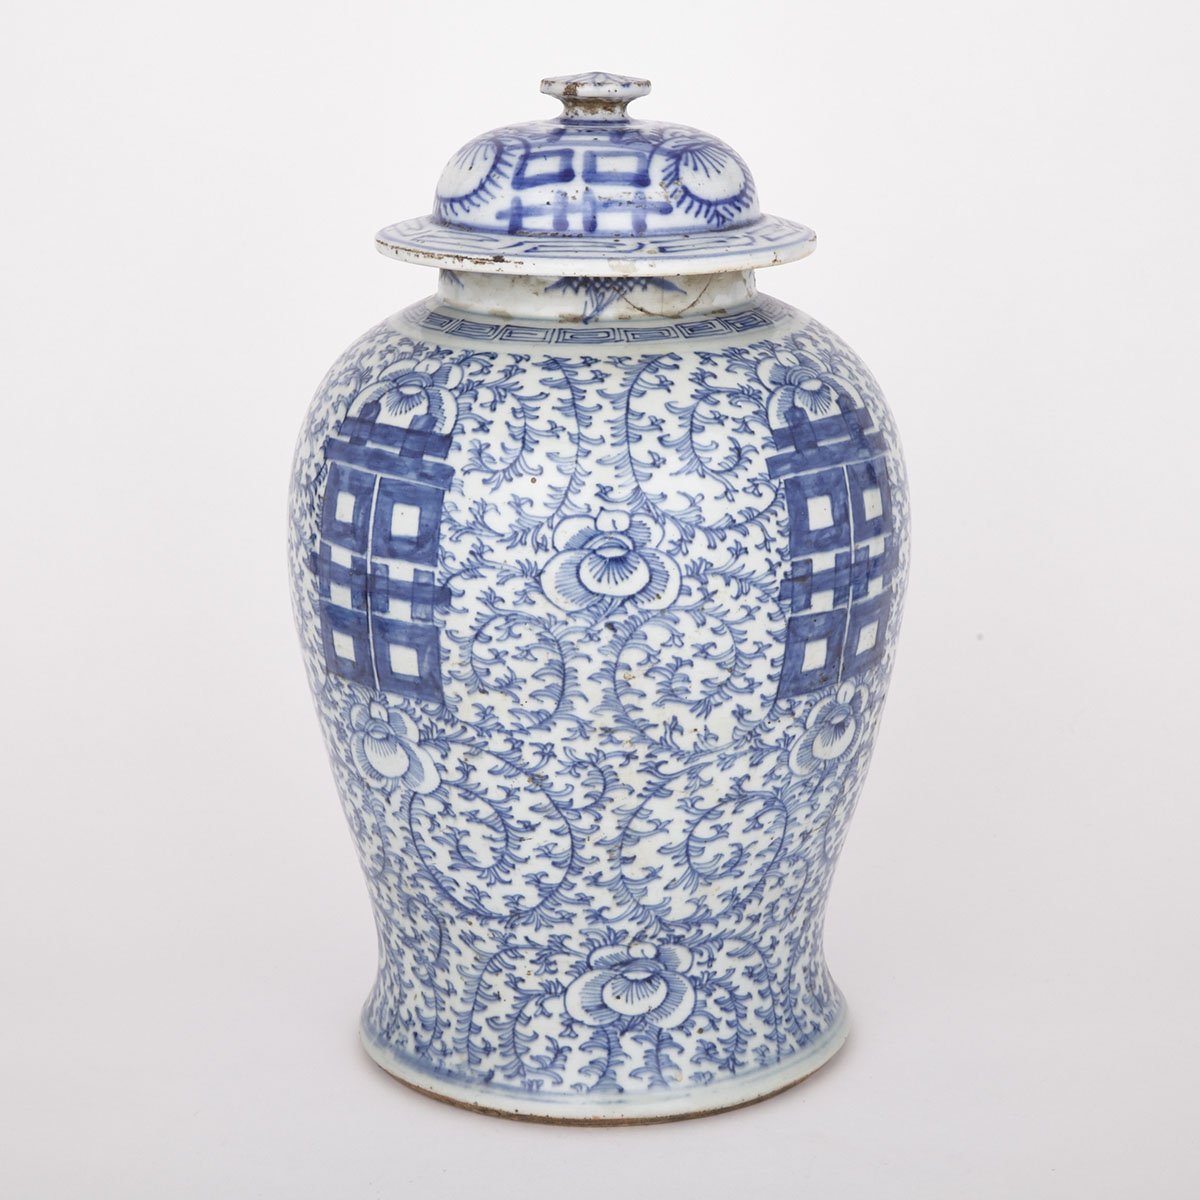 Double Happiness Blue and White Covered Jar, Late 19th Century